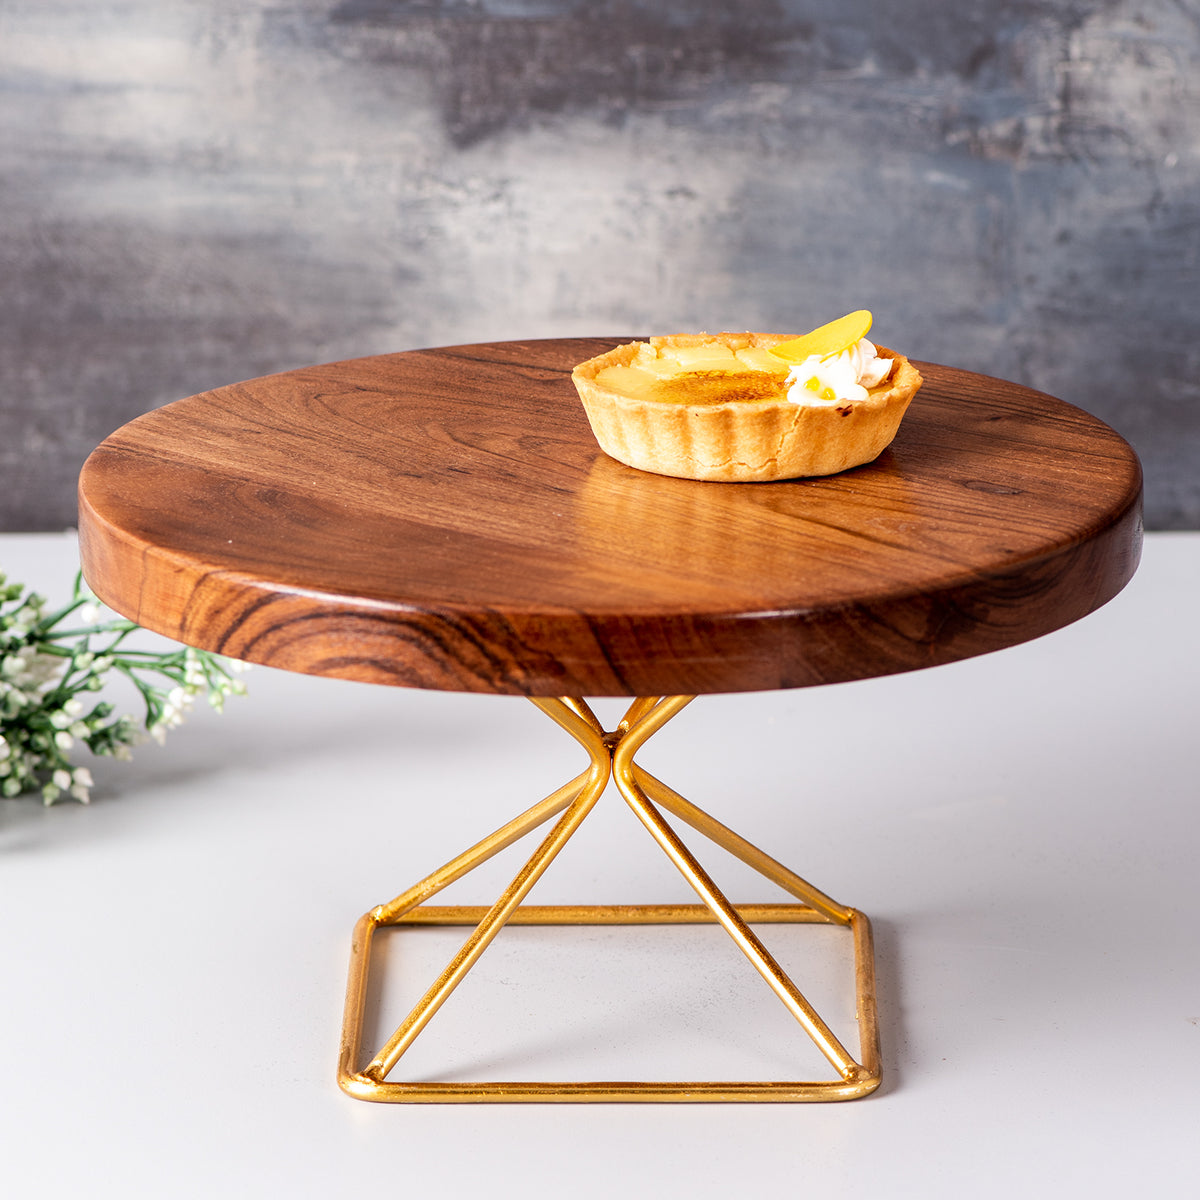 ACACIA TWO-TIERED WOODEN CAKE STAND WITH GLASS DOME